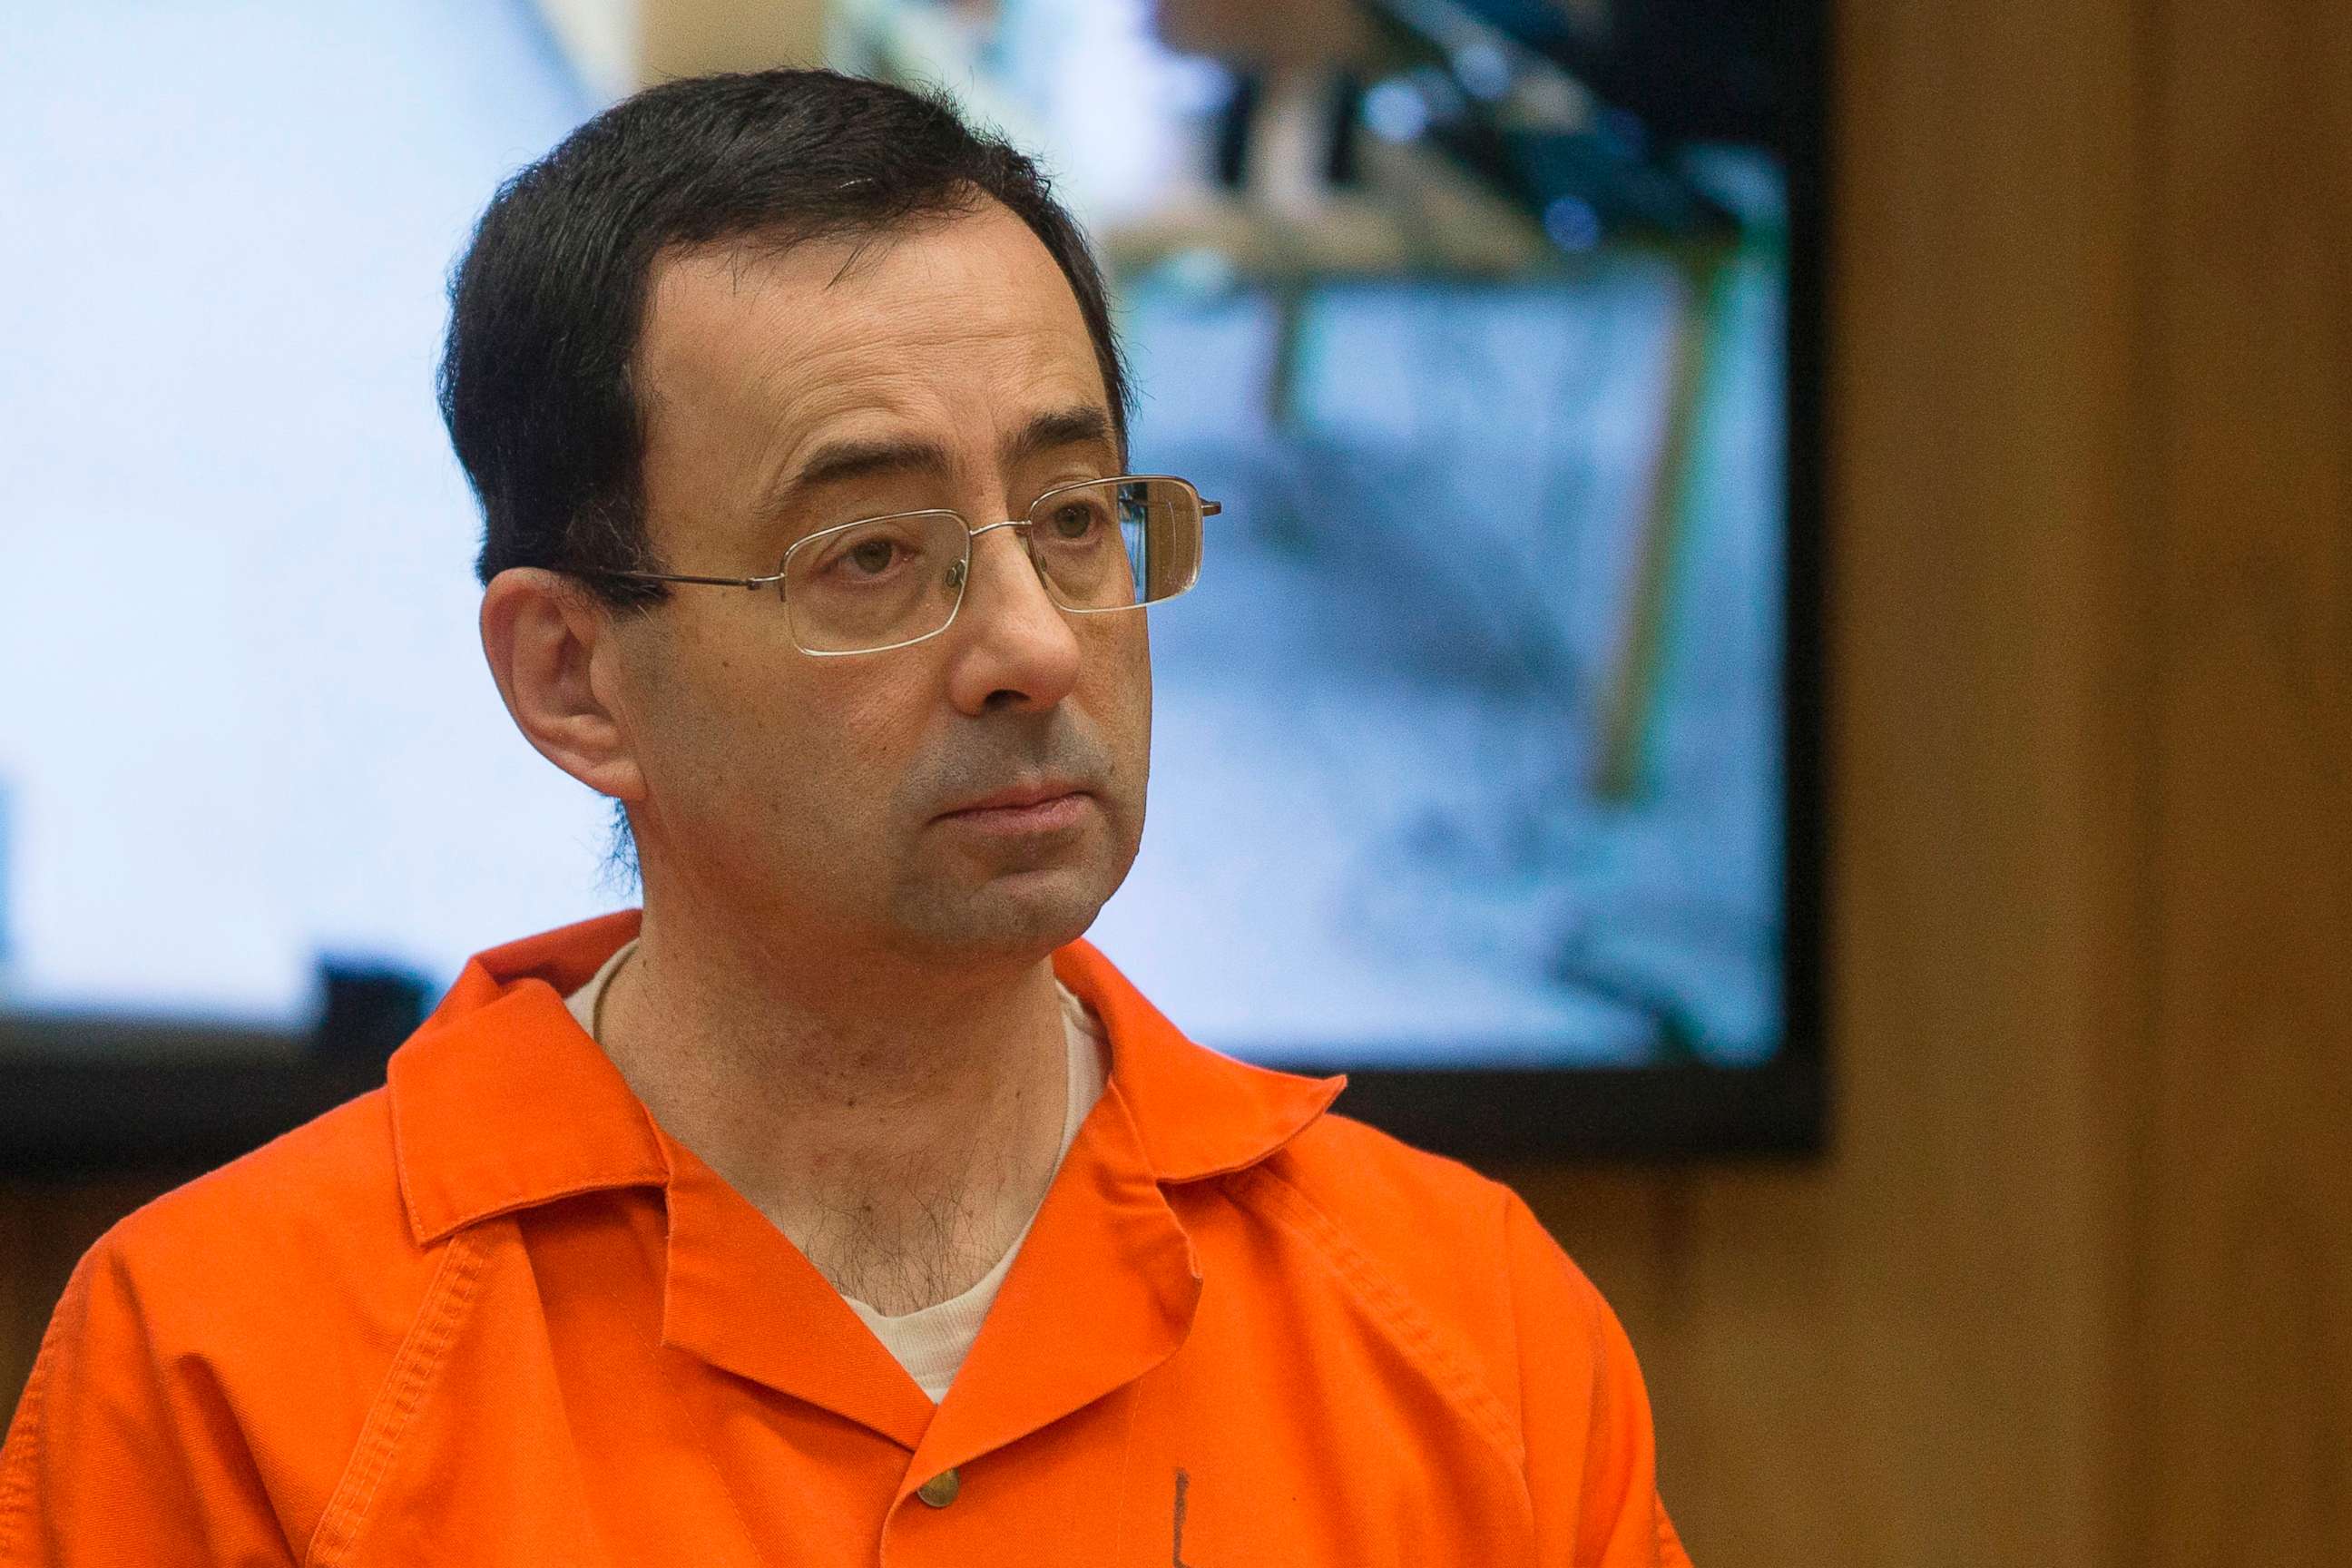 PHOTO: Former Michigan State University and USA Gymnastics doctor Larry Nassar appears in court for his final sentencing phase in Eaton County Circuit Court, Feb. 5, 2018 in Charlotte, Michigan.